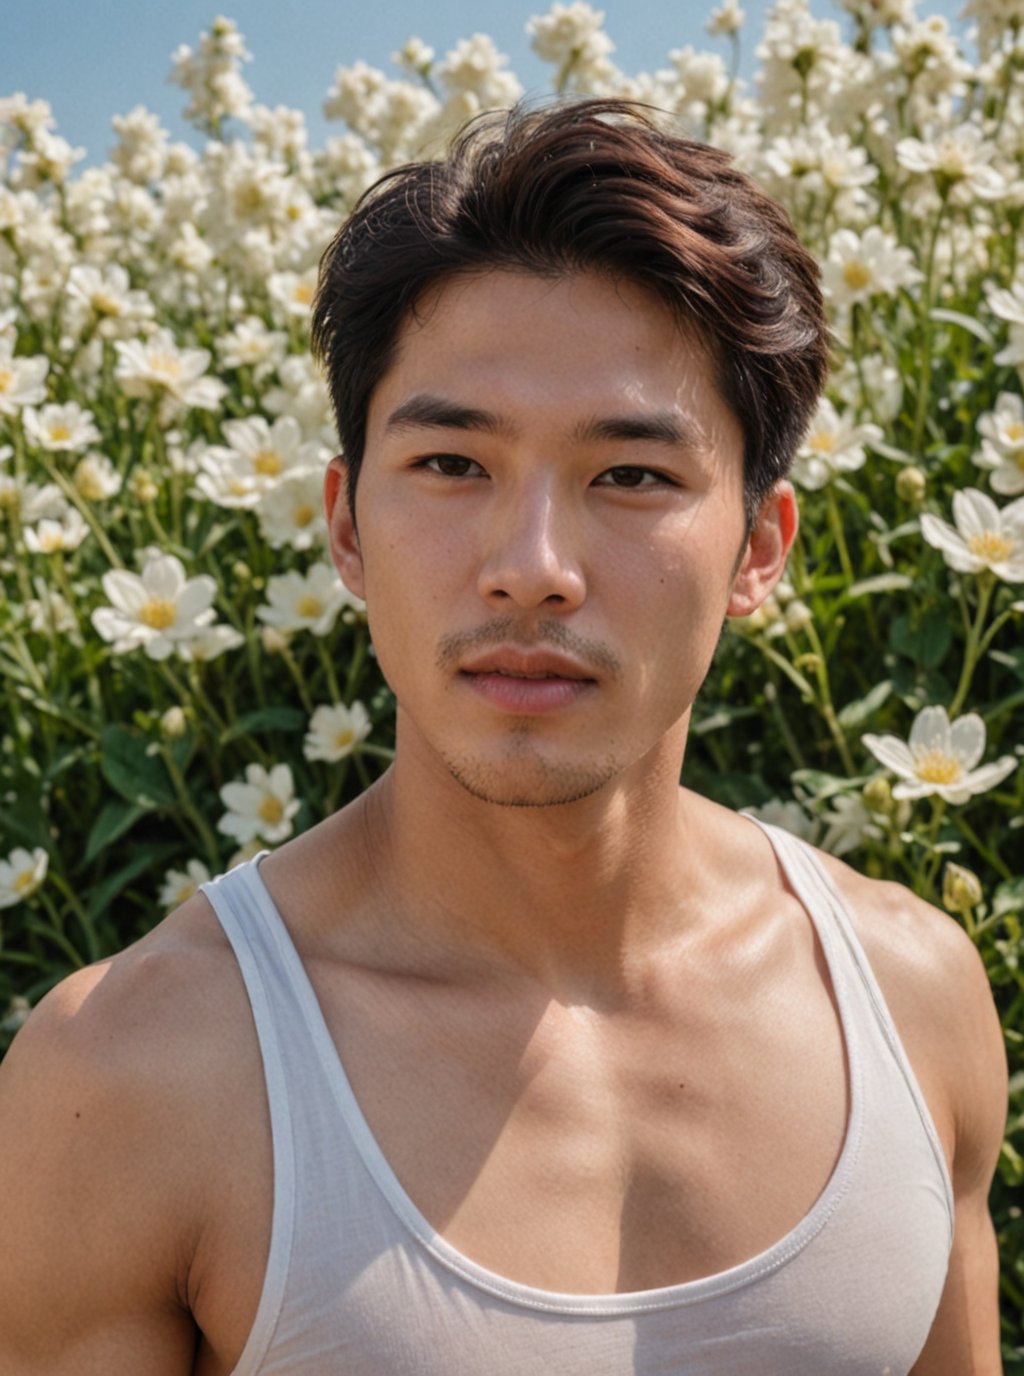 Handsome young man with Korean features, 29 years old, posing in a vast white  flowers field against an endless blue sky horizon. He stands strong, showcasing his toned physique and six-pack abs. His cheeky, mischievous expression is lit by the alluring sunlight, highlighting his healthy lips. Sony A7III captures the scene with precision using the  TTArtisan 100mm F2.8  Soft Bokeh Lens Full Frame ,Wide-Angle,Eye level perspective,emphasizing upper body details and strict facial features,high-impact strictly face detail, lifelike person, extremely realistic,  wearing white tank top,  perfect libs with sharp rendering 